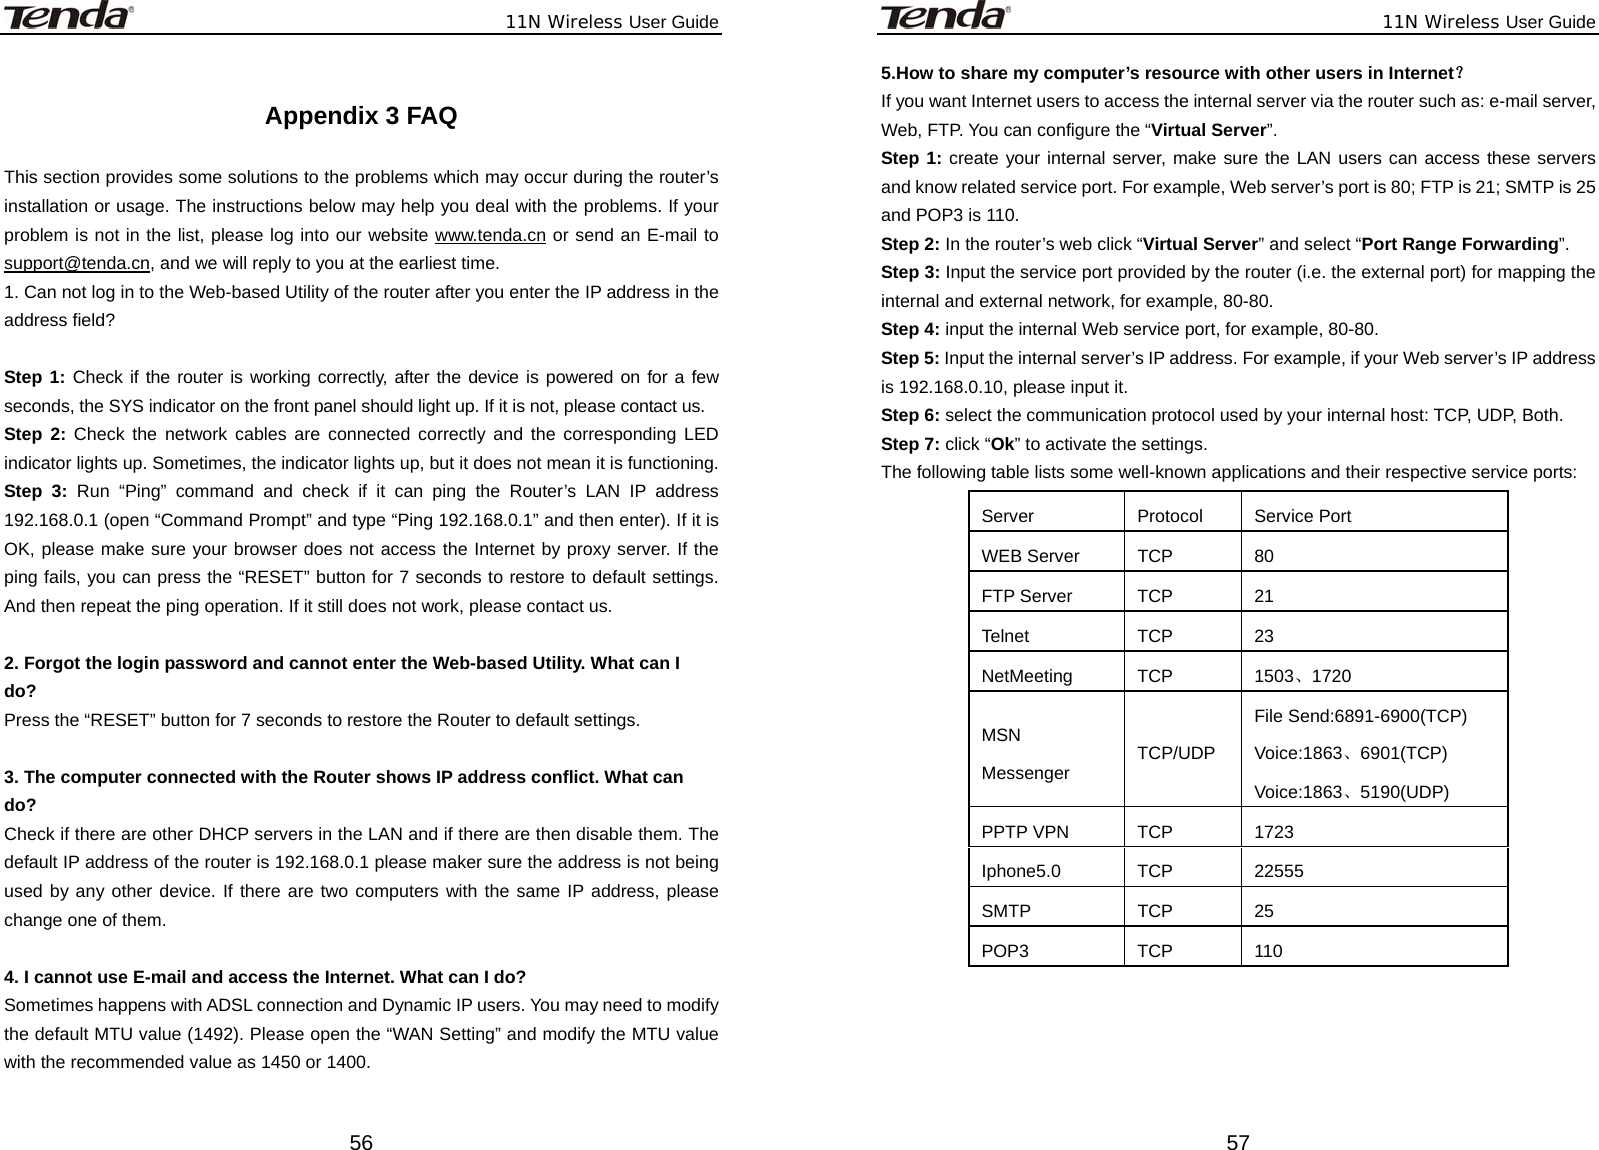              11N Wireless User Guide  56 Appendix 3 FAQ  This section provides some solutions to the problems which may occur during the router’s installation or usage. The instructions below may help you deal with the problems. If your problem is not in the list, please log into our website www.tenda.cn or send an E-mail to support@tenda.cn, and we will reply to you at the earliest time. 1. Can not log in to the Web-based Utility of the router after you enter the IP address in the address field?  Step 1: Check if the router is working correctly, after the device is powered on for a few seconds, the SYS indicator on the front panel should light up. If it is not, please contact us.   Step 2: Check the network cables are connected correctly and the corresponding LED indicator lights up. Sometimes, the indicator lights up, but it does not mean it is functioning.   Step 3: Run “Ping” command and check if it can ping the Router’s LAN IP address 192.168.0.1 (open “Command Prompt” and type “Ping 192.168.0.1” and then enter). If it is OK, please make sure your browser does not access the Internet by proxy server. If the ping fails, you can press the “RESET” button for 7 seconds to restore to default settings. And then repeat the ping operation. If it still does not work, please contact us.  2. Forgot the login password and cannot enter the Web-based Utility. What can I   do? Press the “RESET” button for 7 seconds to restore the Router to default settings.  3. The computer connected with the Router shows IP address conflict. What can   do? Check if there are other DHCP servers in the LAN and if there are then disable them. The default IP address of the router is 192.168.0.1 please maker sure the address is not being used by any other device. If there are two computers with the same IP address, please change one of them.  4. I cannot use E-mail and access the Internet. What can I do? Sometimes happens with ADSL connection and Dynamic IP users. You may need to modify the default MTU value (1492). Please open the “WAN Setting” and modify the MTU value with the recommended value as 1450 or 1400.                                                                                                        11N Wireless User Guide  575.How to share my computer’s resource with other users in Internet？ If you want Internet users to access the internal server via the router such as: e-mail server, Web, FTP. You can configure the “Virtual Server”. Step 1: create your internal server, make sure the LAN users can access these servers and know related service port. For example, Web server’s port is 80; FTP is 21; SMTP is 25 and POP3 is 110. Step 2: In the router’s web click “Virtual Server” and select “Port Range Forwarding”. Step 3: Input the service port provided by the router (i.e. the external port) for mapping the internal and external network, for example, 80-80. Step 4: input the internal Web service port, for example, 80-80. Step 5: Input the internal server’s IP address. For example, if your Web server’s IP address is 192.168.0.10, please input it. Step 6: select the communication protocol used by your internal host: TCP, UDP, Both. Step 7: click “Ok” to activate the settings. The following table lists some well-known applications and their respective service ports:   Server Protocol Service Port WEB Server  TCP  80 FTP Server  TCP  21 Telnet TCP 23 NetMeeting TCP  1503、1720 MSN Messenger  TCP/UDP File Send:6891-6900(TCP) Voice:1863、6901(TCP) Voice:1863、5190(UDP) PPTP VPN  TCP  1723 Iphone5.0 TCP  22555 SMTP TCP 25 POP3 TCP 110    